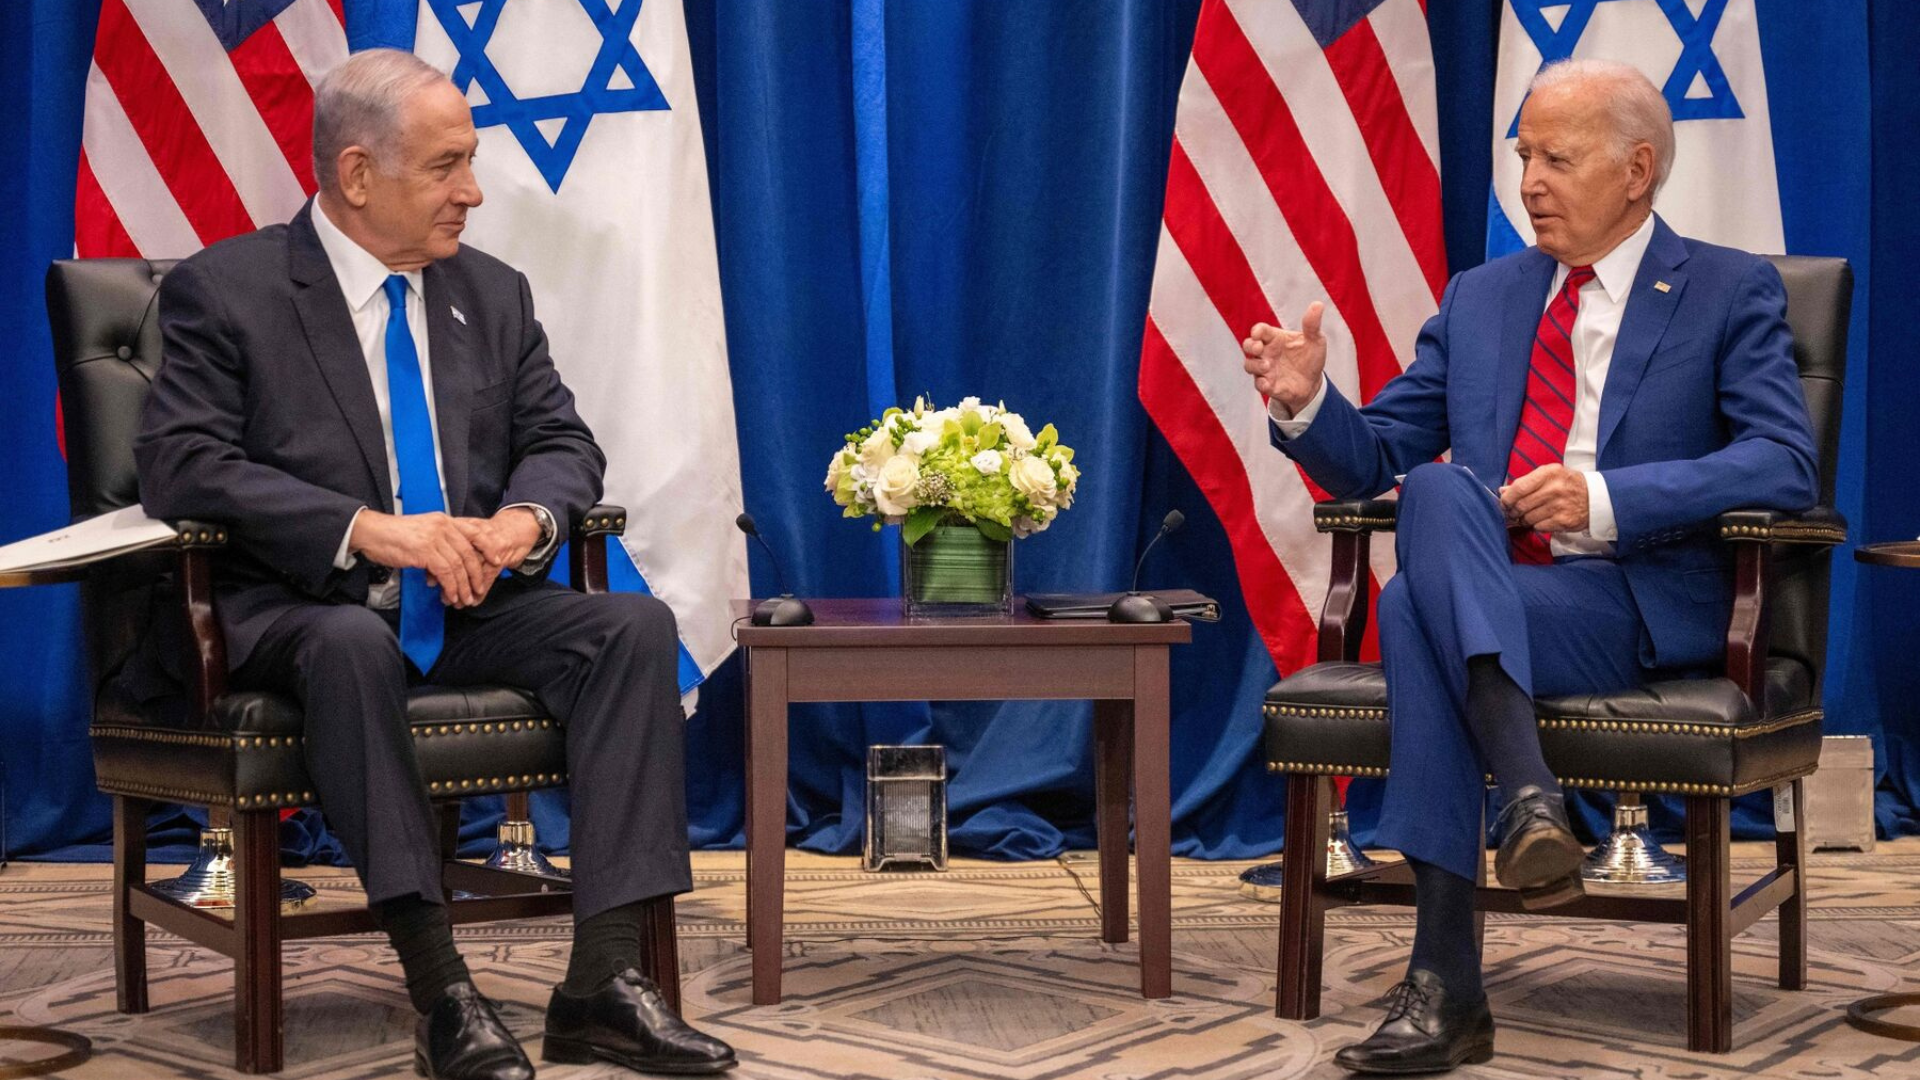 Israel-Hamas War: PM Netanyahu Accuses US of Withholding Arms Shipments